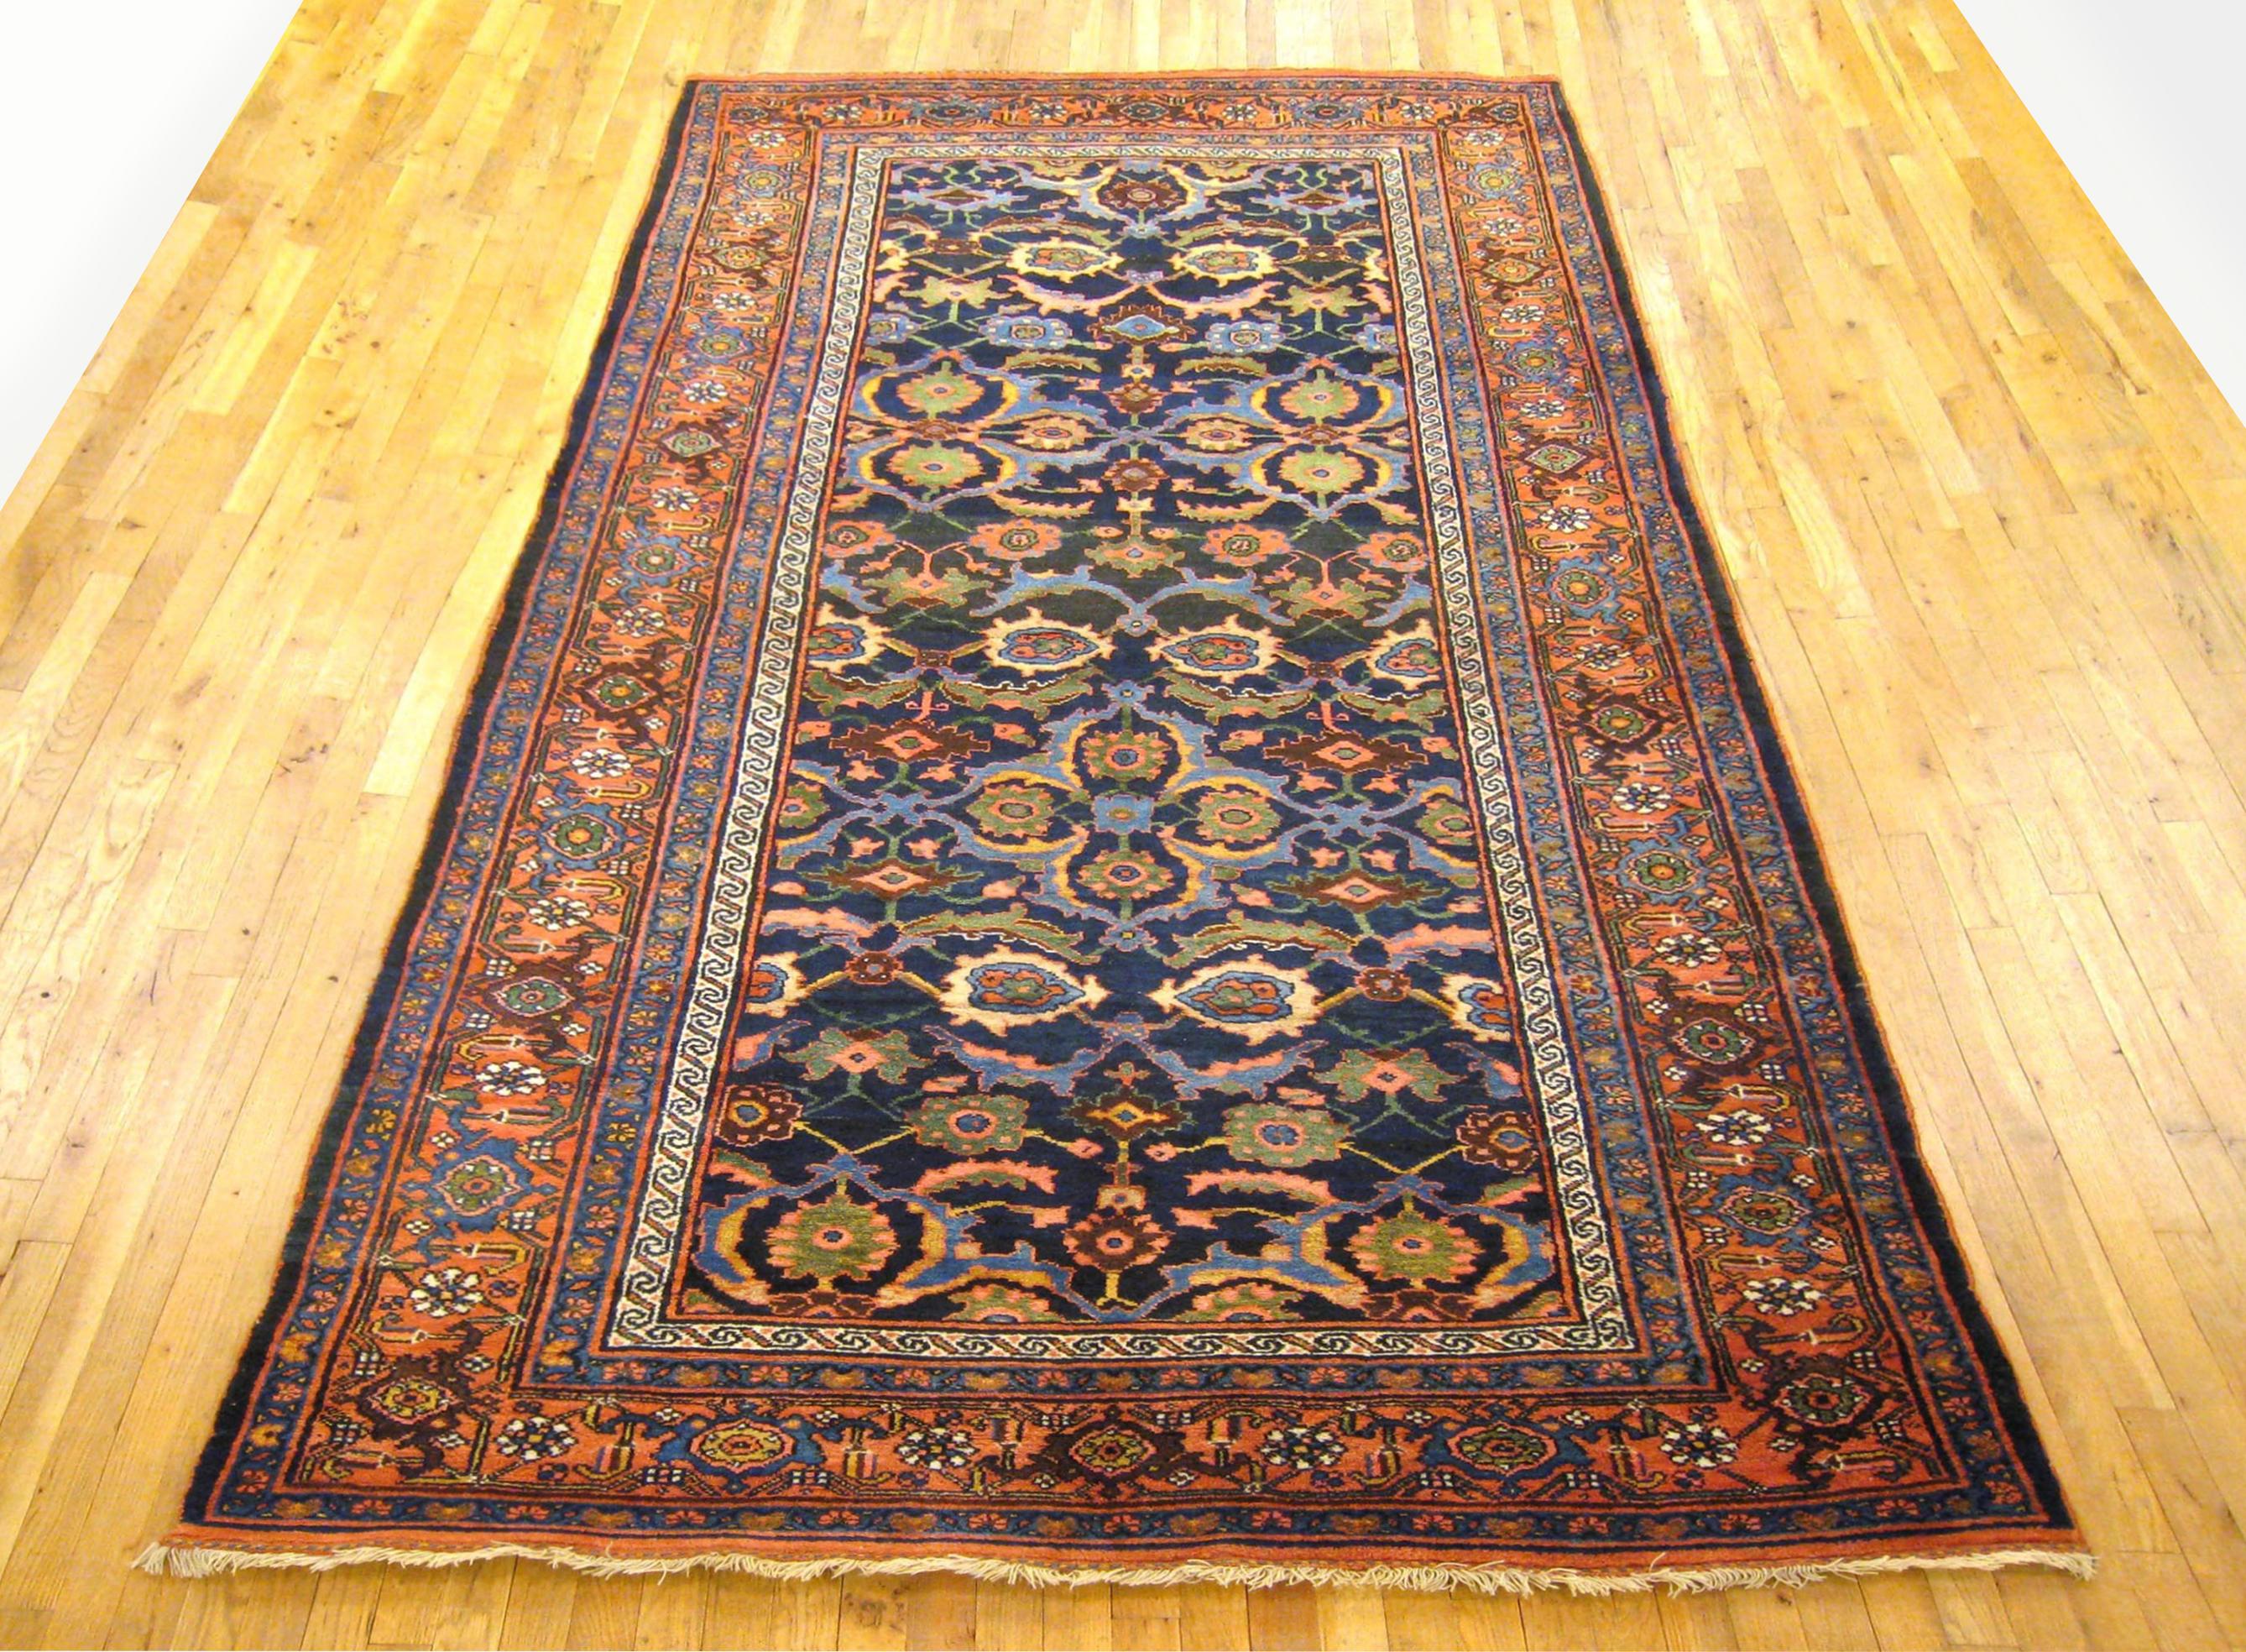 Antique Persian Bidjar Rug, Runner size, circa 1900.

A one-of-a-kind antique Persian Bidjar Oriental Carpet, hand-knotted with soft wool pile. This beautiful rug features floral elements allover the navy primary field, with a red outer border. In